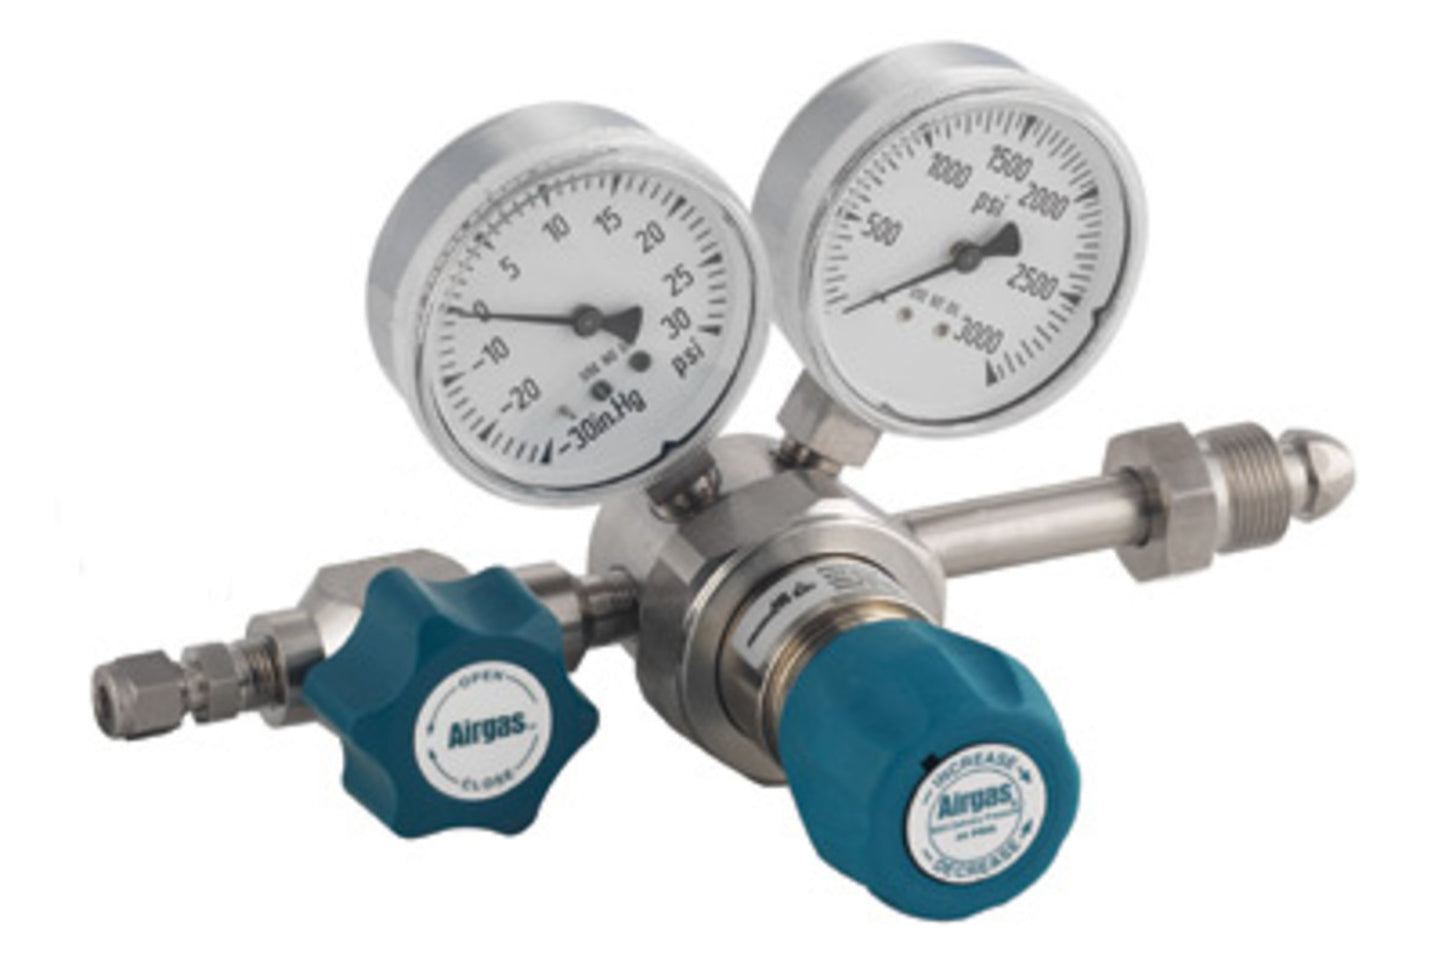 Airgas Model C444F590 Stainless Steel High Purity Single Stage Pressure Regulator With 1/4" FNPT Connection And Threadless Seat